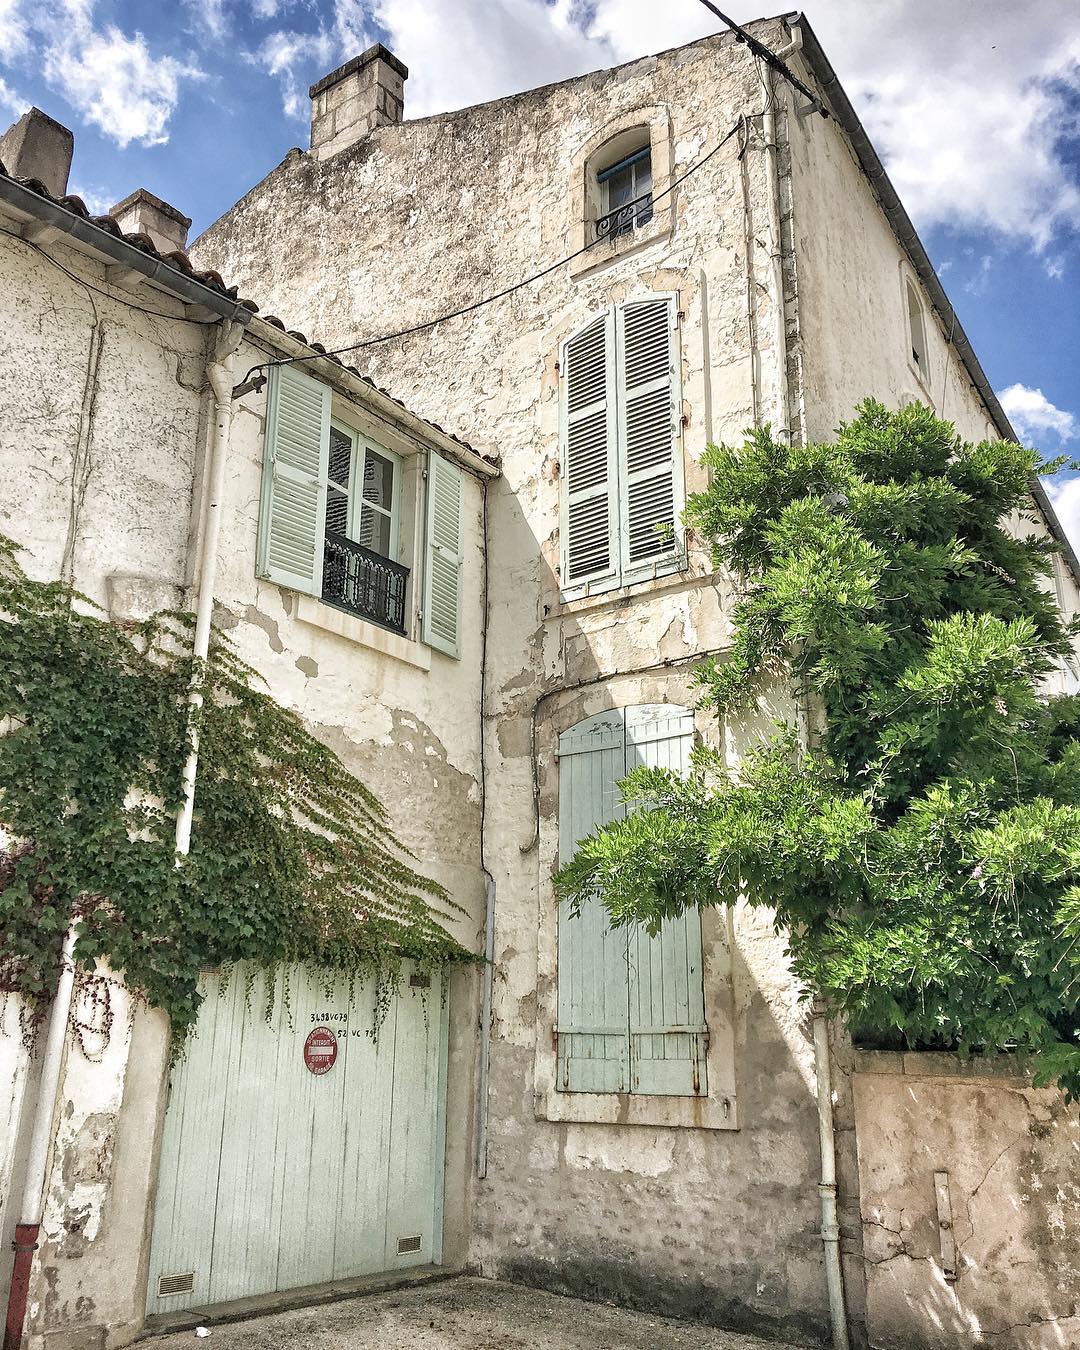 Charming and rustic French farmhouse exterior with Vert Olivier Green Shutters - photo by Vivi et Margot.